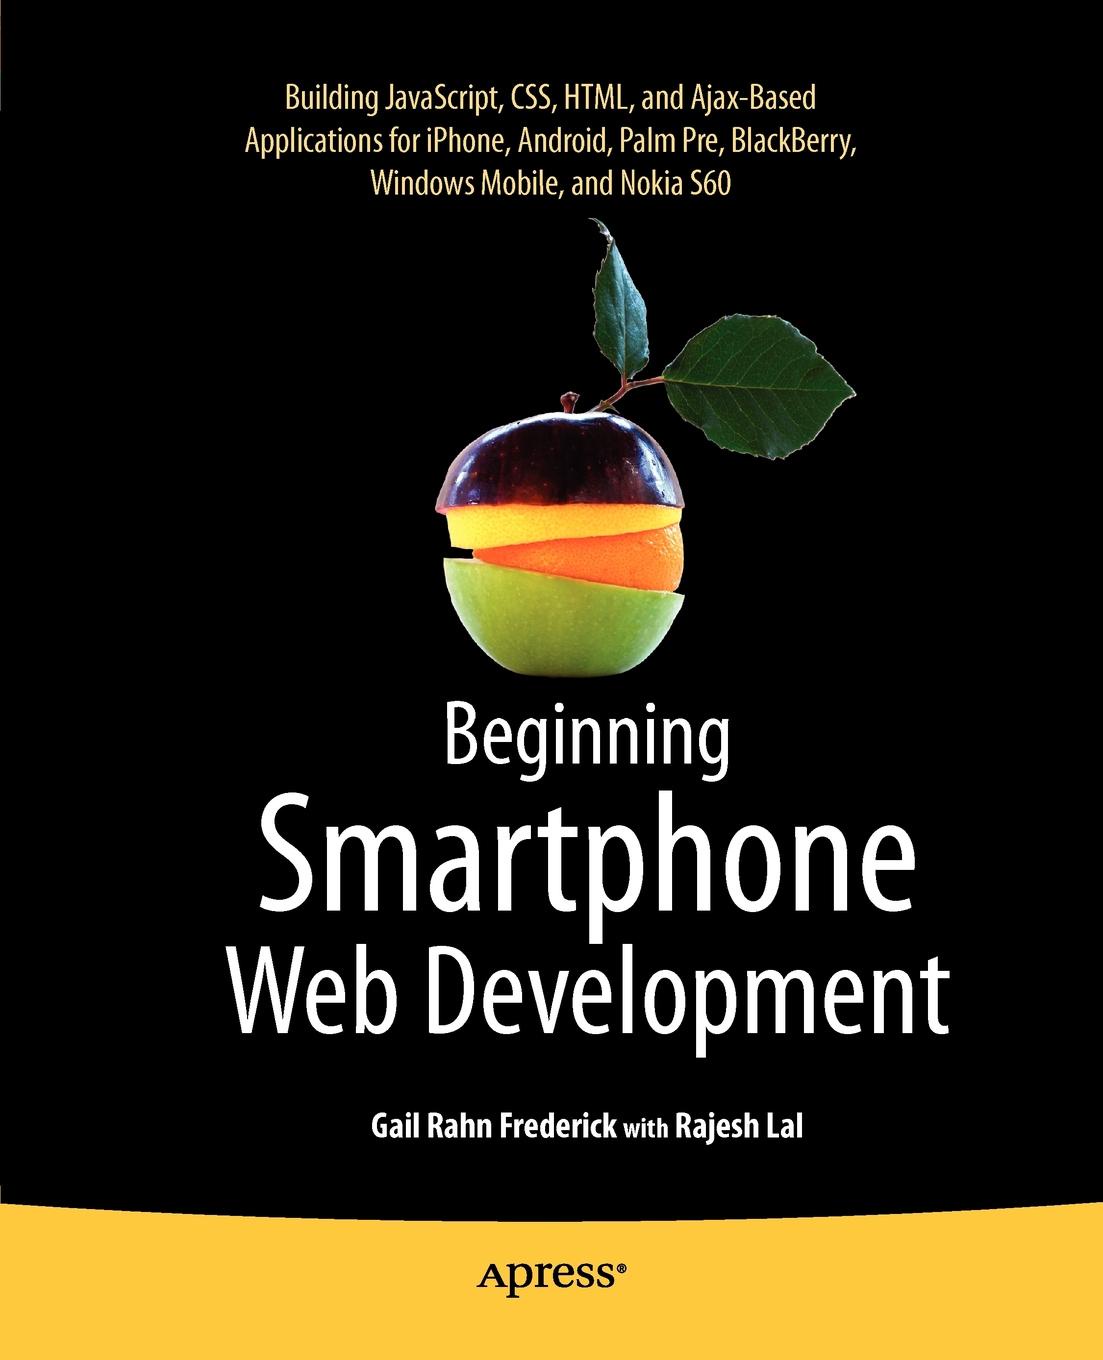 Beginning Smartphone Web Development. Building JavaScript, CSS, HTML and Ajax-based Applications for iPhone, Android, Palm Pre, BlackBerry, Windows Mobile and Nokia S60